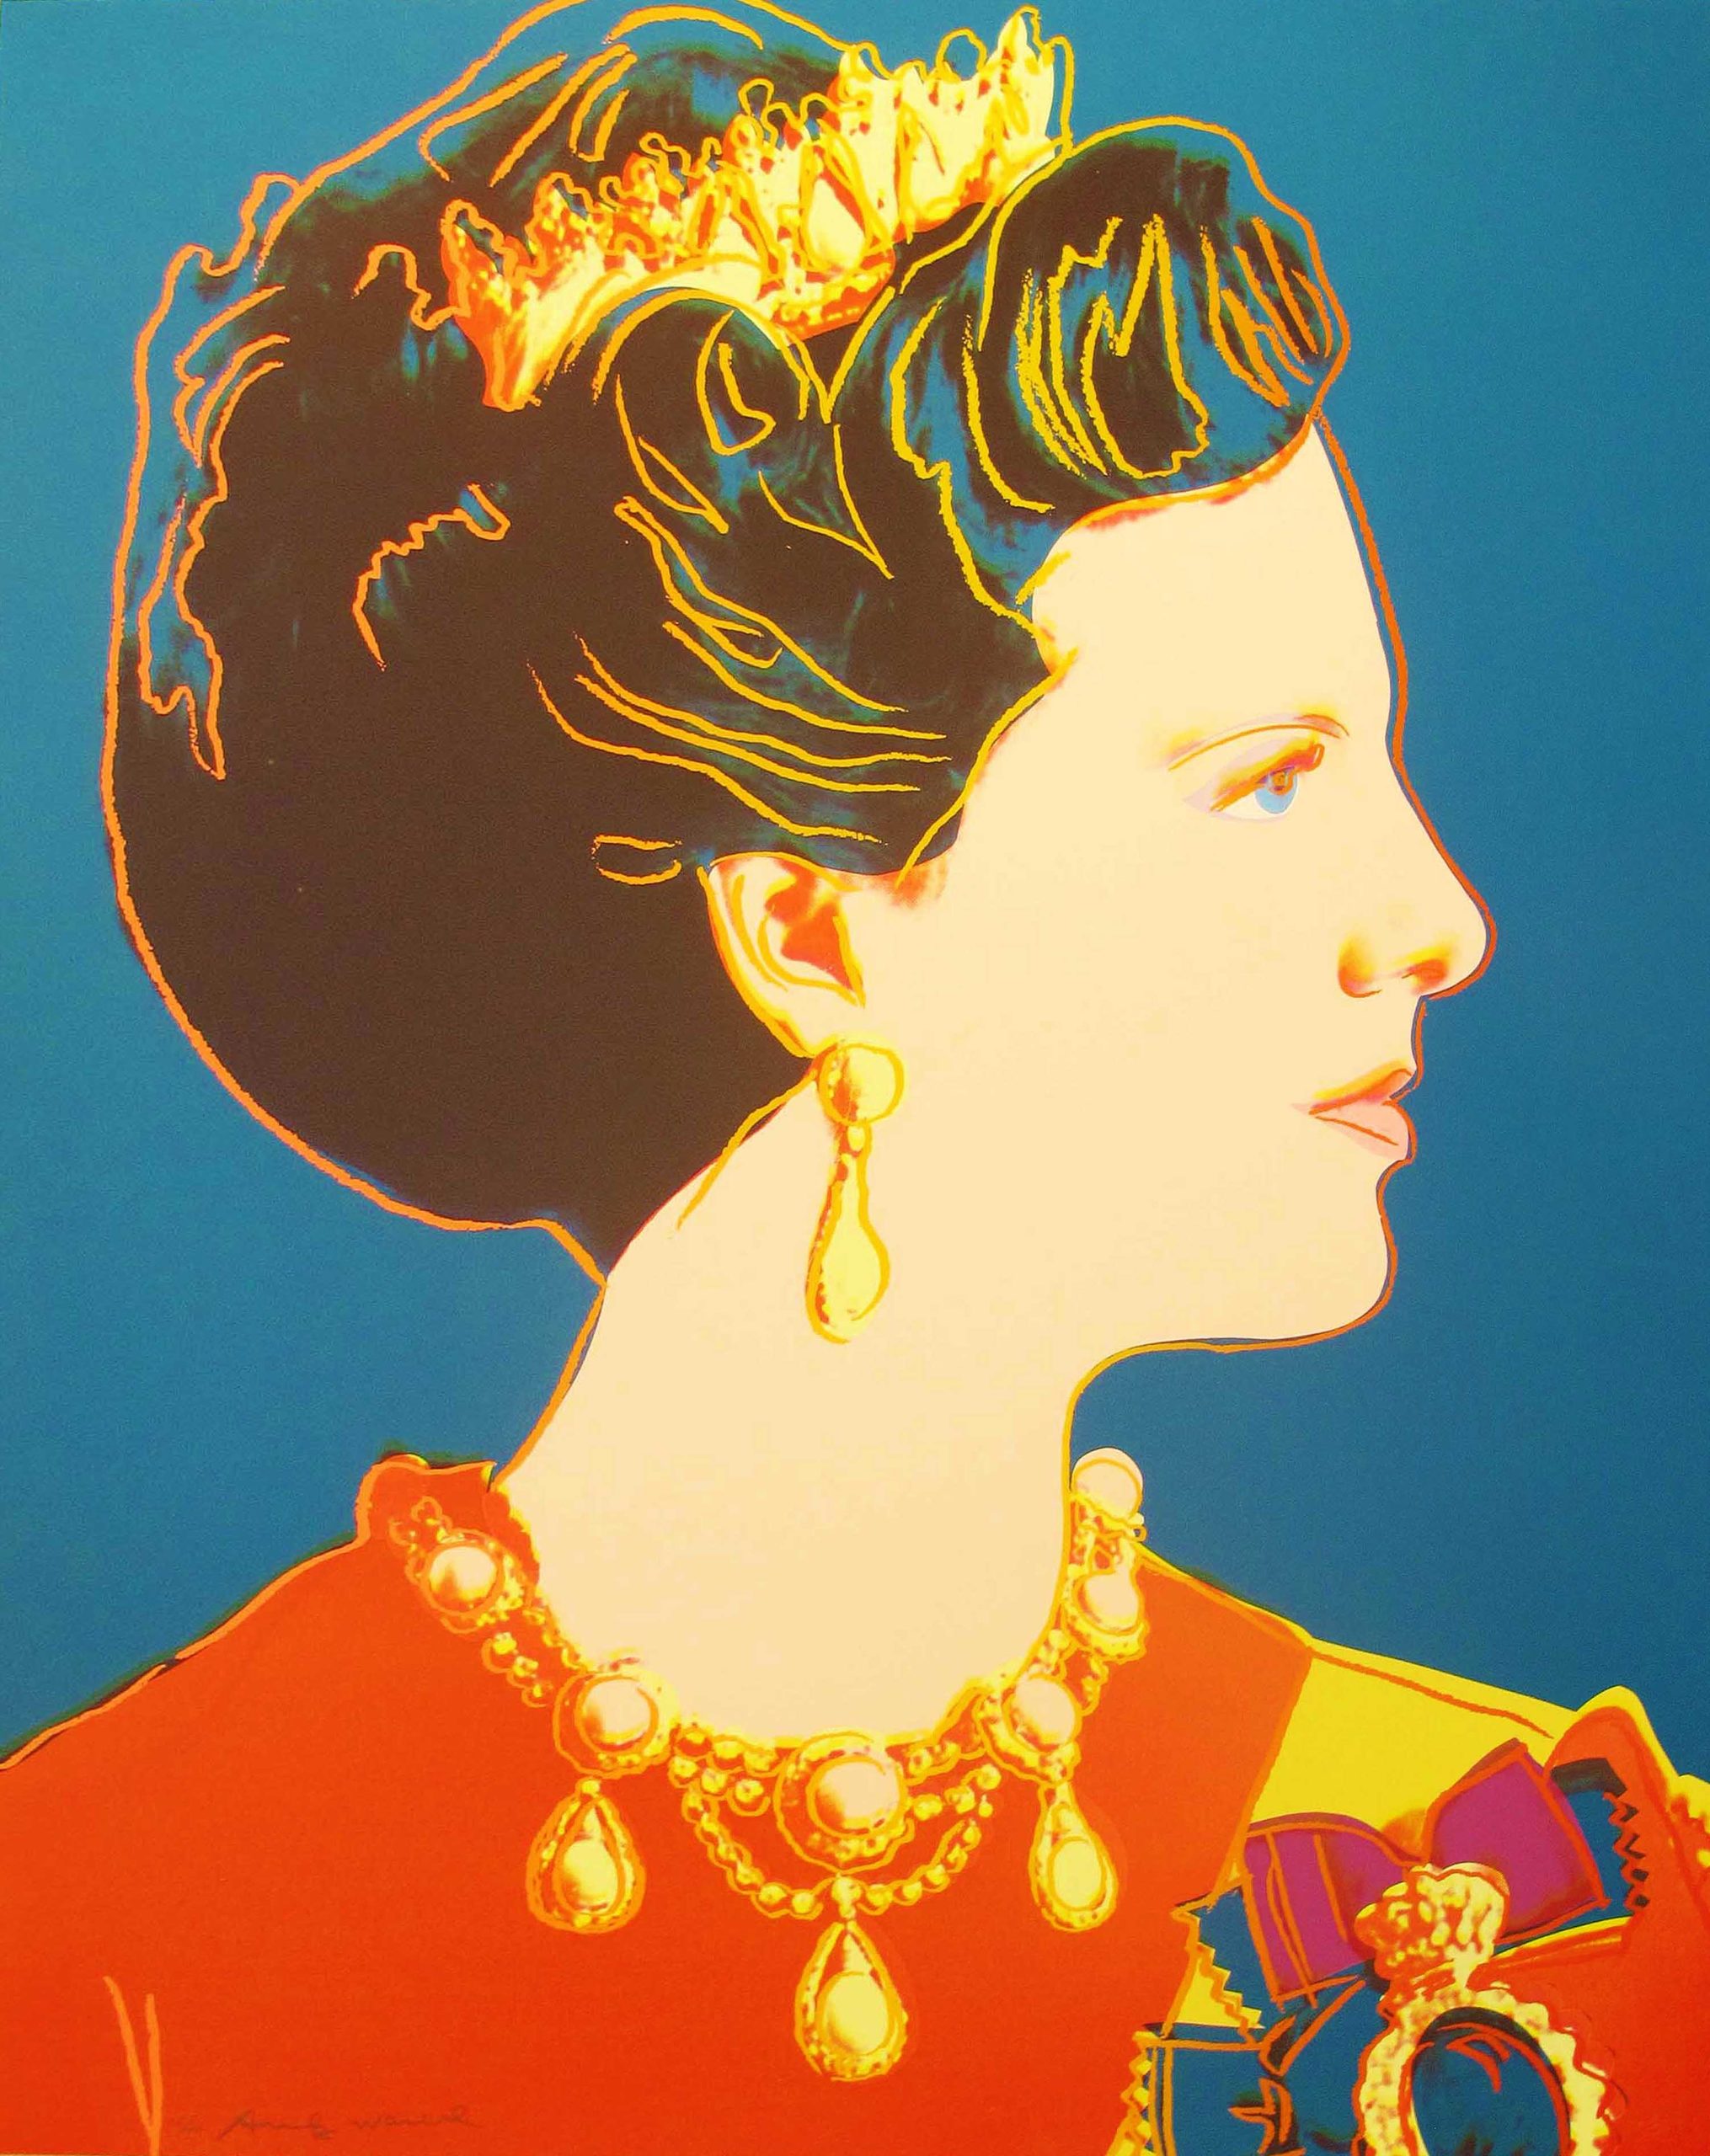 Andy Warhol | Reigning Queens | Queen Margrethe II of Denmark 343 | 1985 | Image of Artists' work.